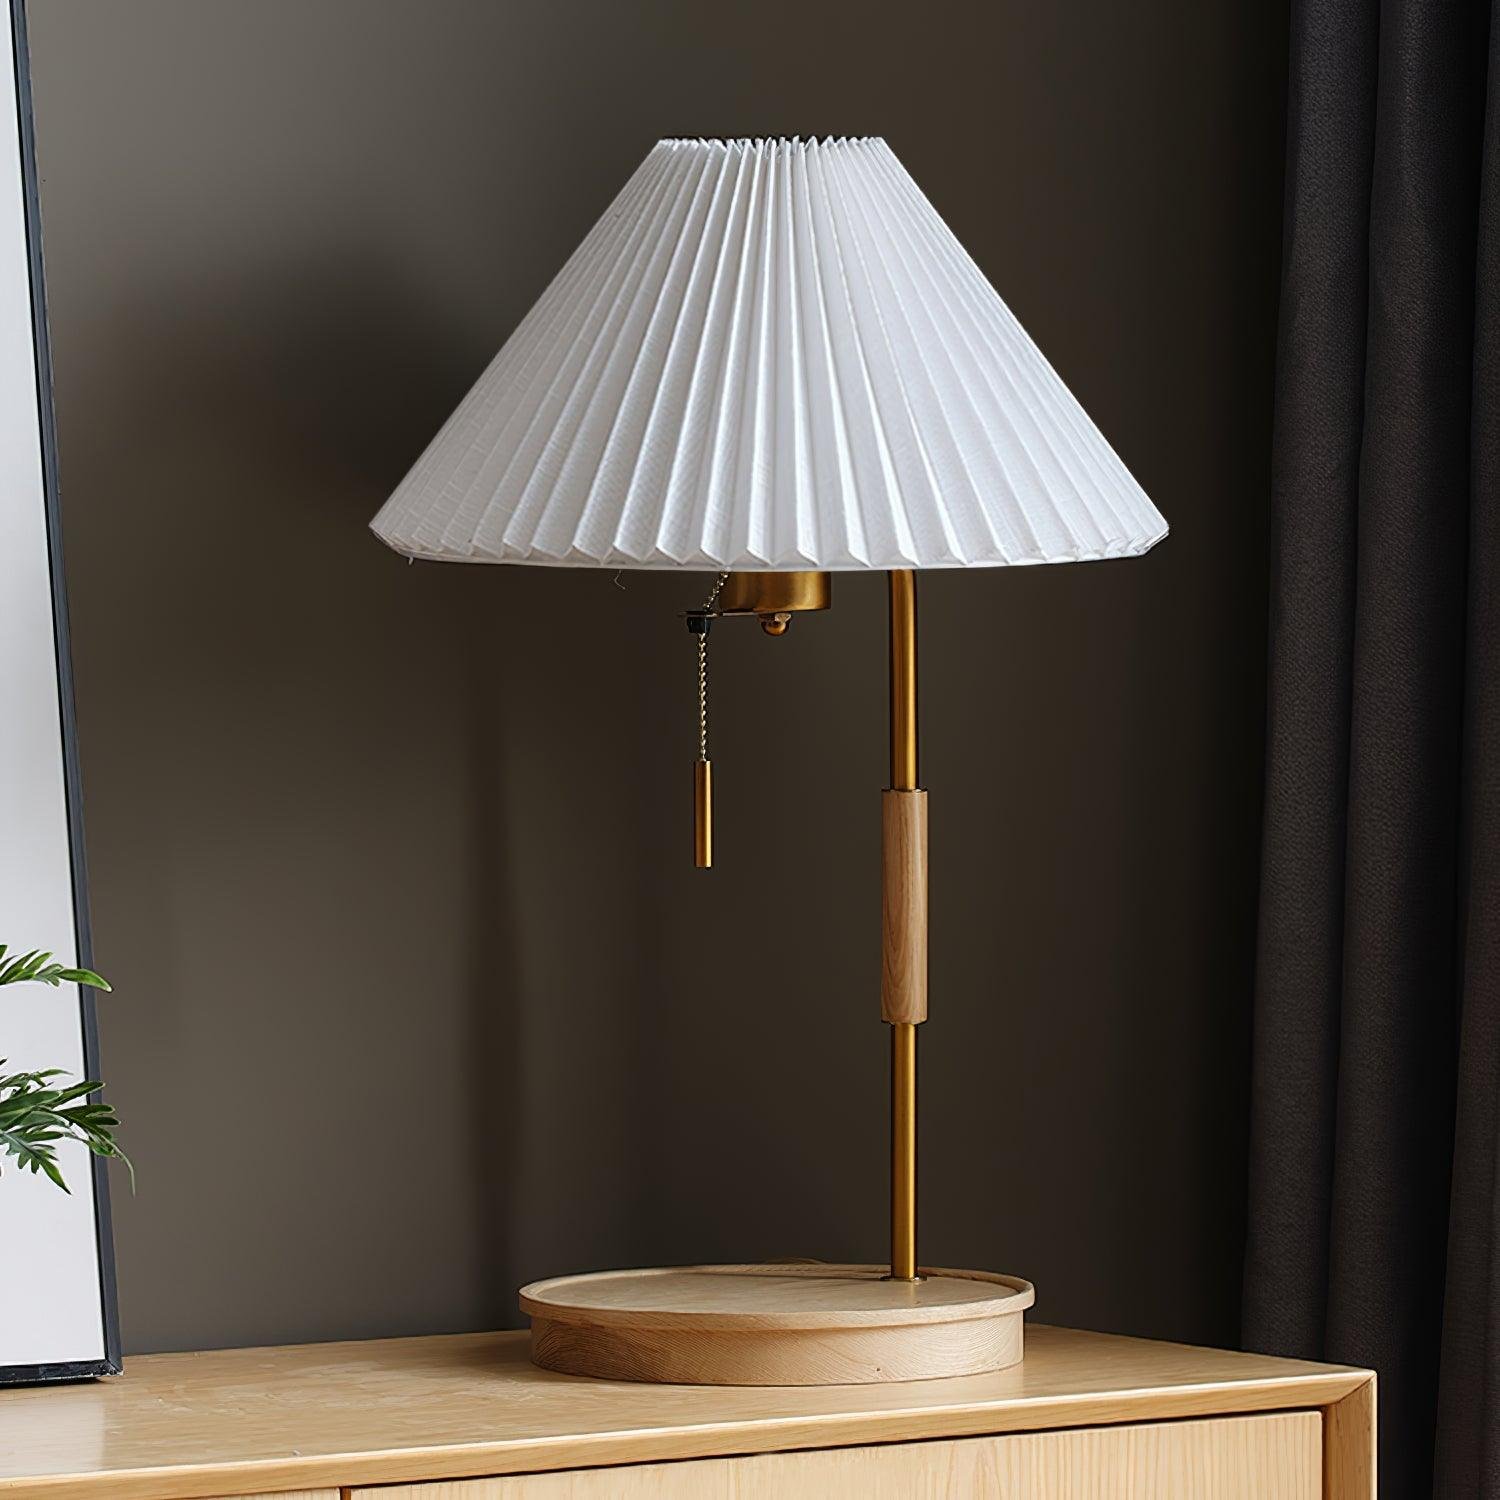 Wooden Retro Table Lamp with a diameter of 12.2 inches and a height of 20.4 inches, or 31cm x 52cm, available in a wood color and white combination, and with an EU plug.